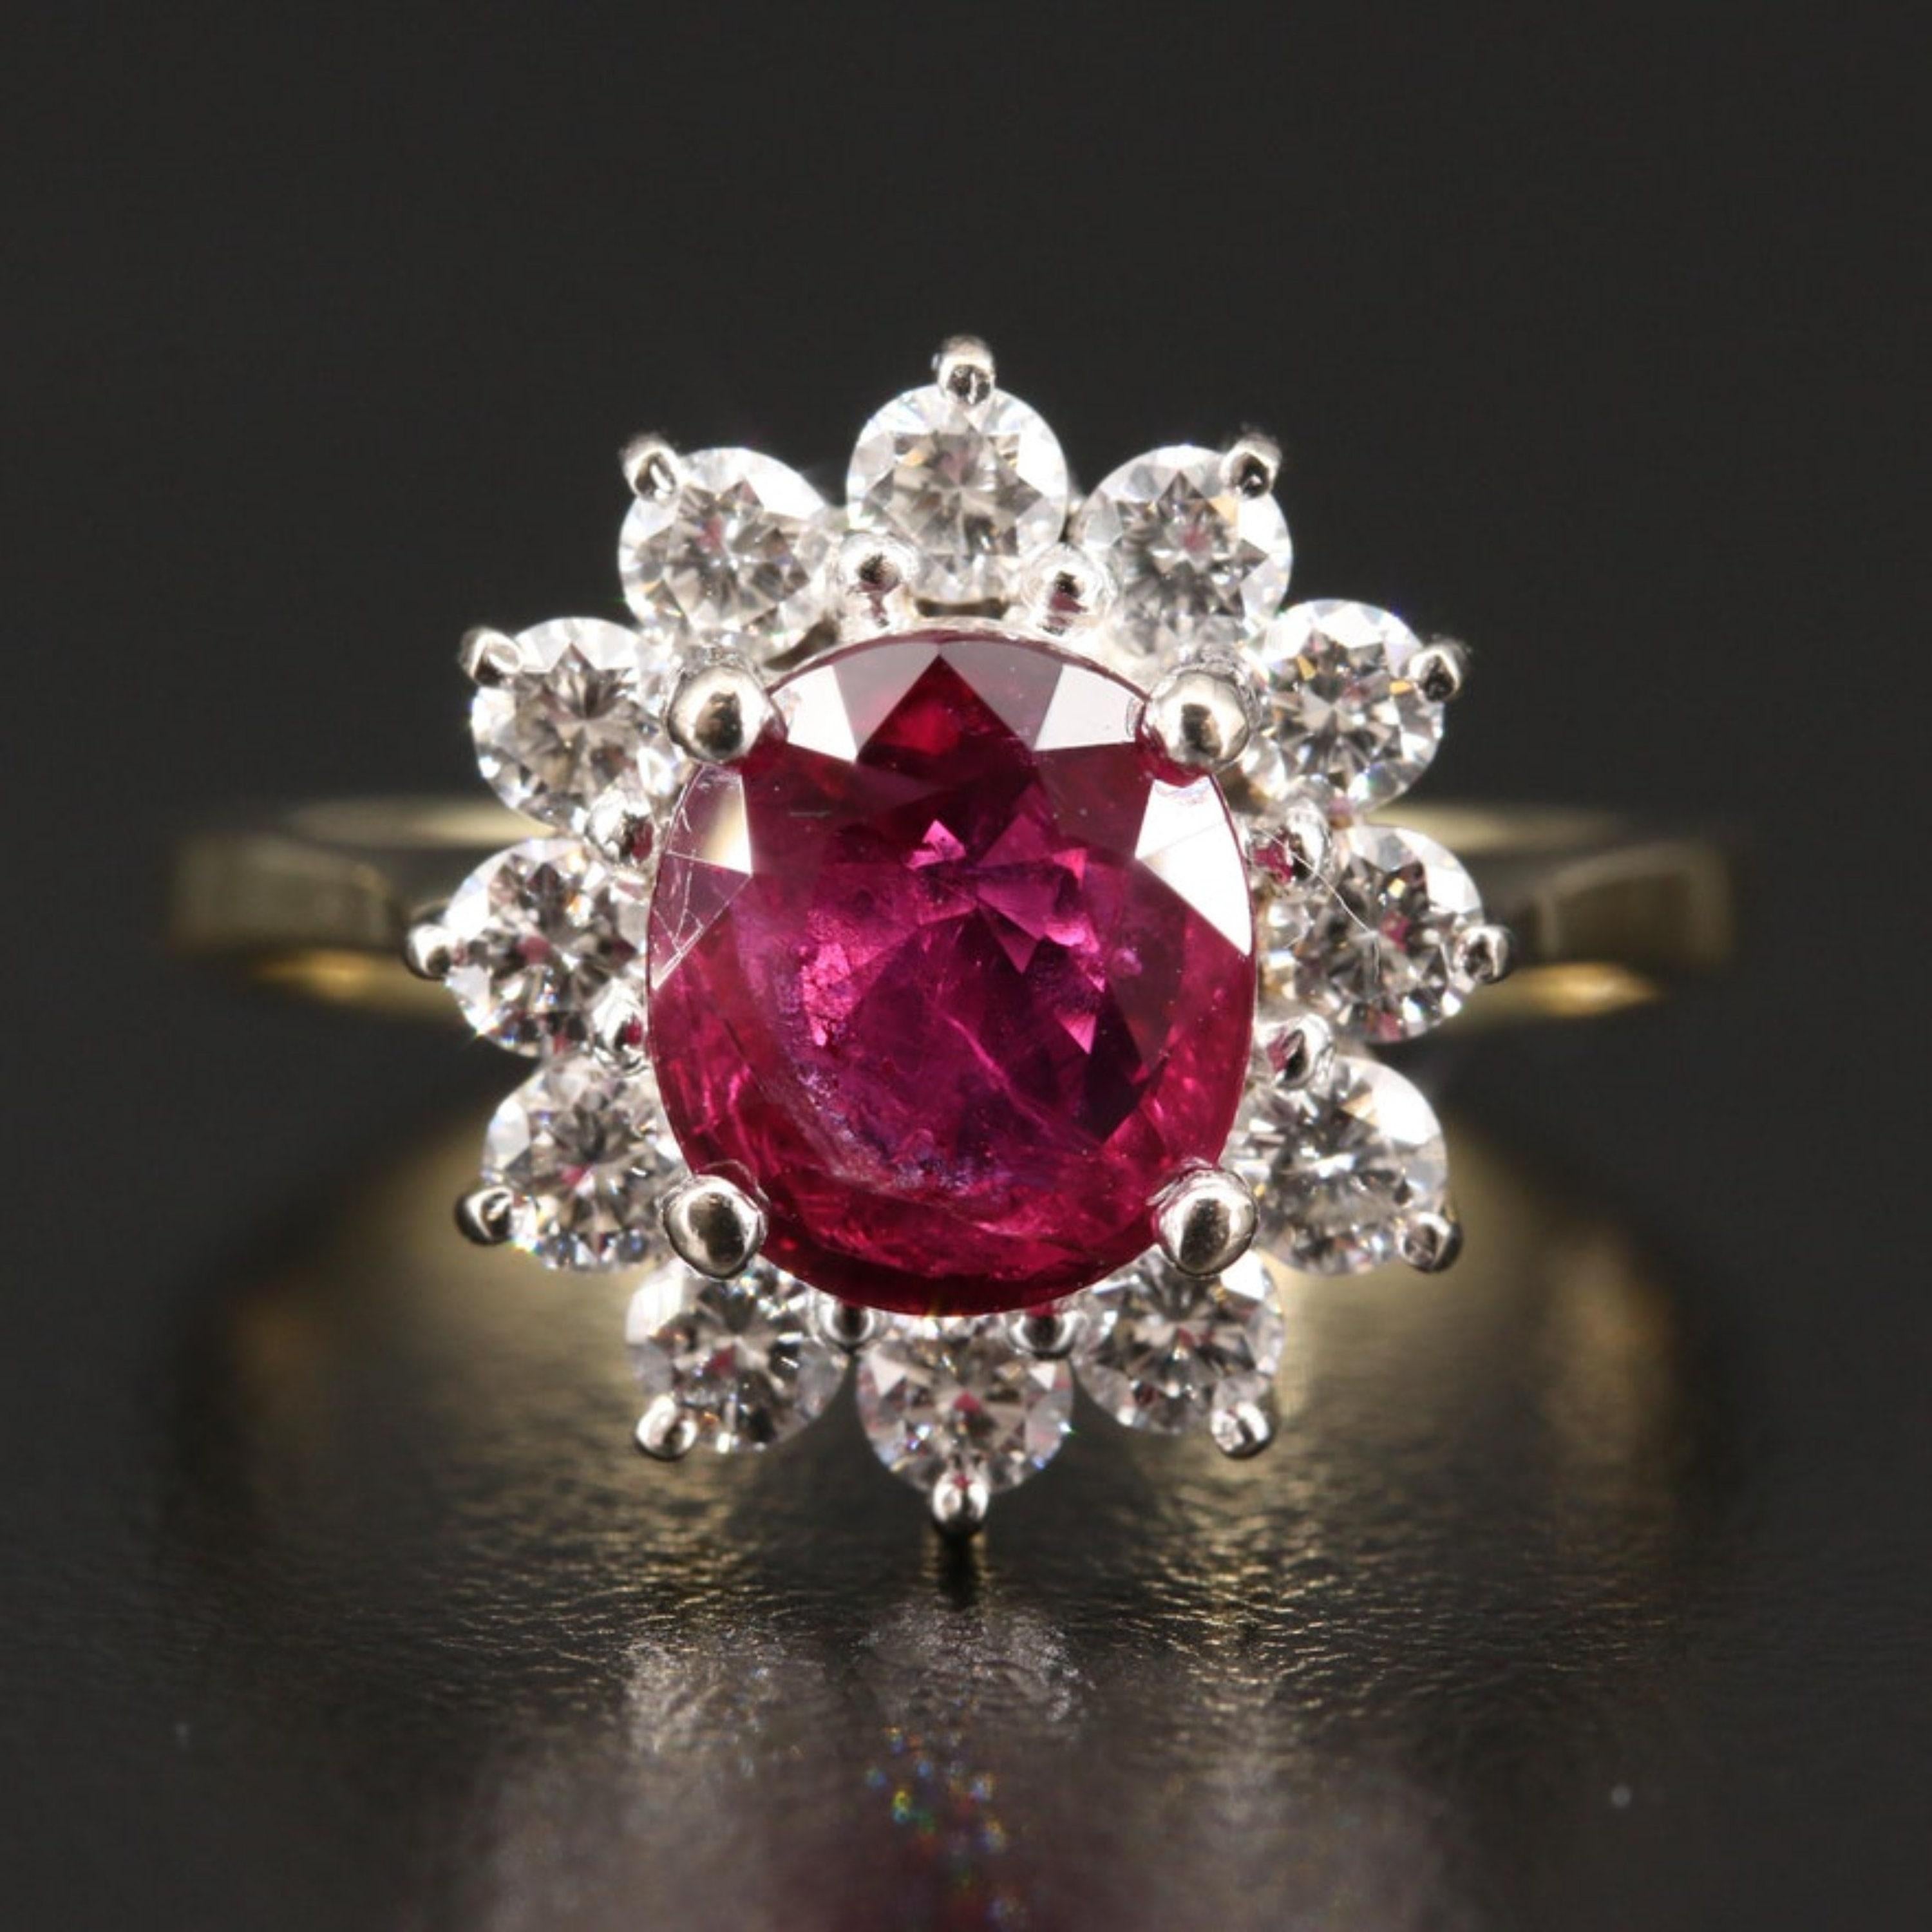 For Sale:  Certified 1.19 Carat Ruby Diamond Engagement Ring Floral Halo Ruby Bridal Ring 4